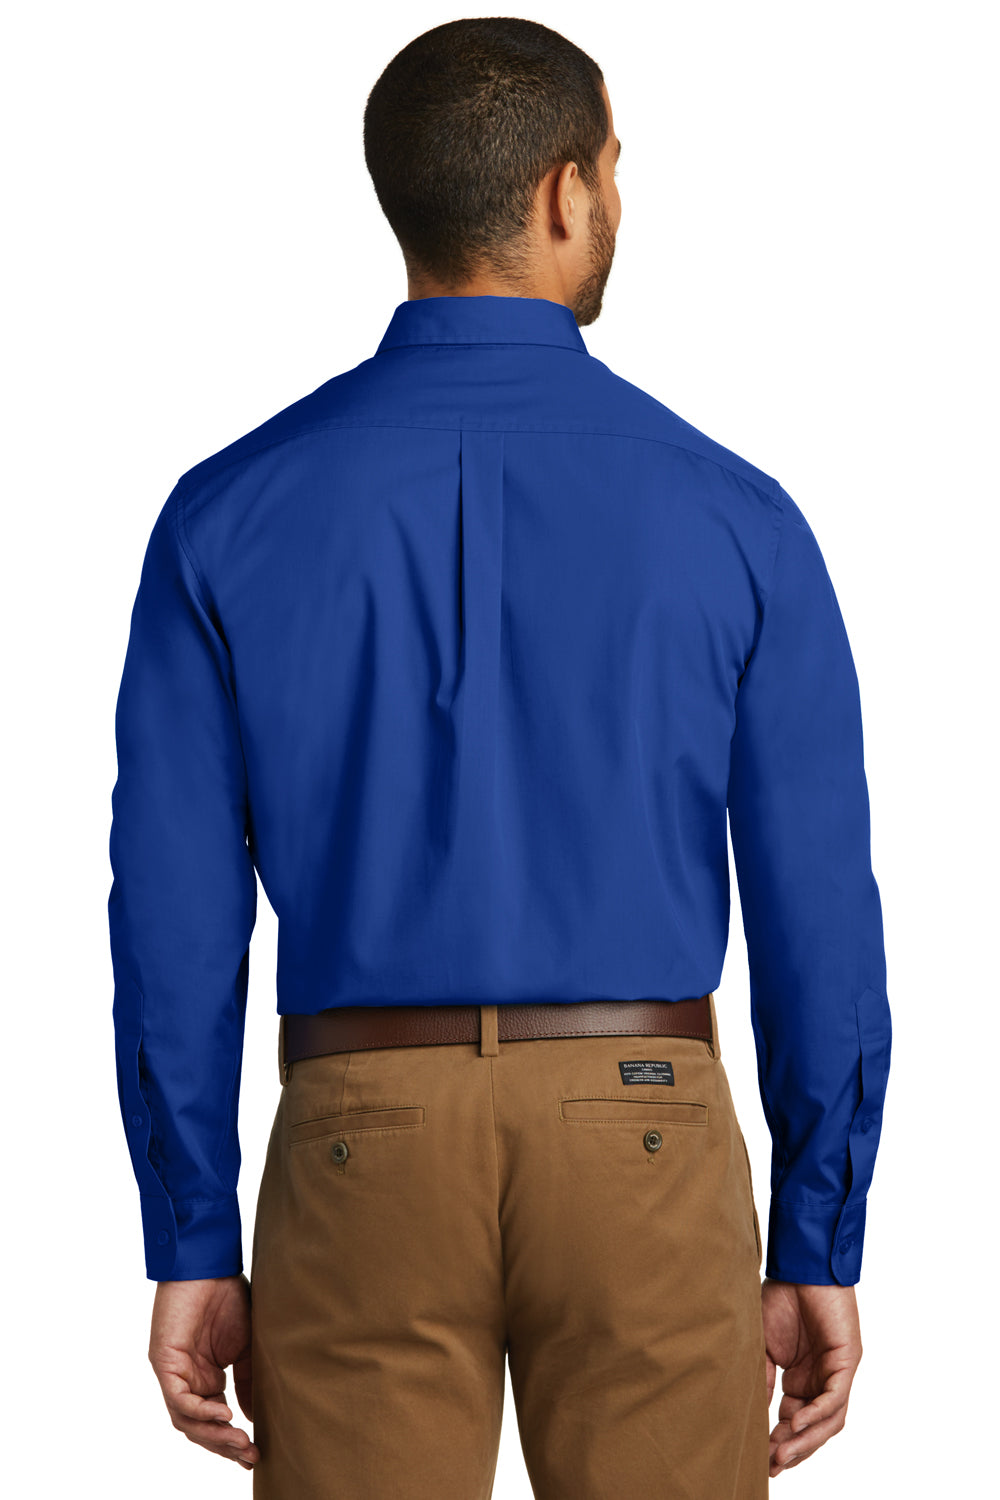 Port Authority W100 Mens Carefree Stain Resistant Long Sleeve Button Down Shirt w/ Pocket Royal Blue Back